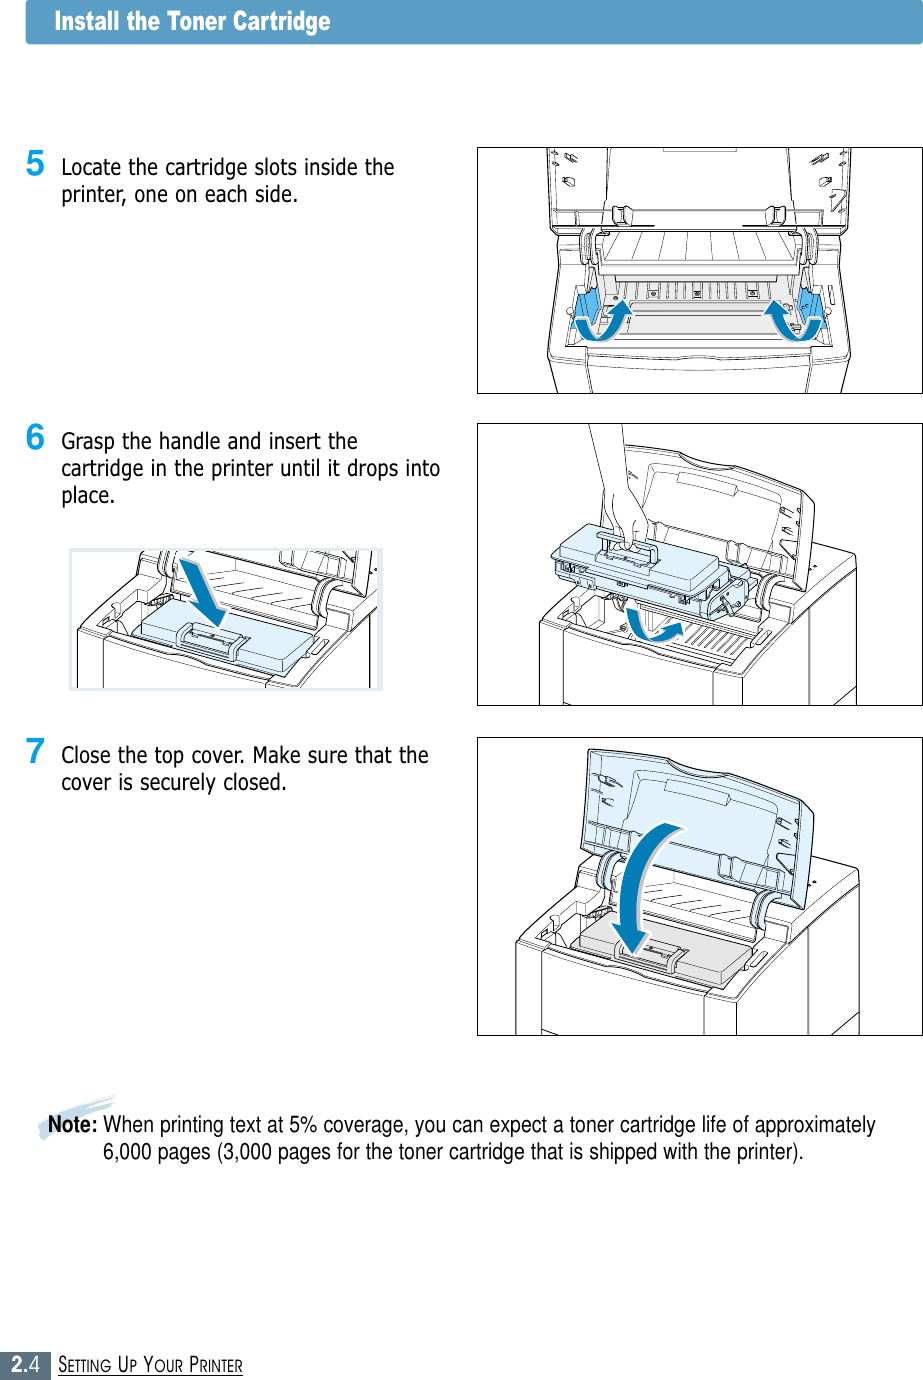 2.4SETTING UP YOUR PRINTERNote: When printing text at 5% coverage, you can expect a toner cartridge life of approximately6,000 pages (3,000 pages for the toner cartridge that is shipped with the printer).6Grasp the handle and insert thecartridge in the printer until it drops intoplace.7Close the top cover. Make sure that thecover is securely closed.5Locate the cartridge slots inside theprinter, one on each side.Install the Toner Cartridge